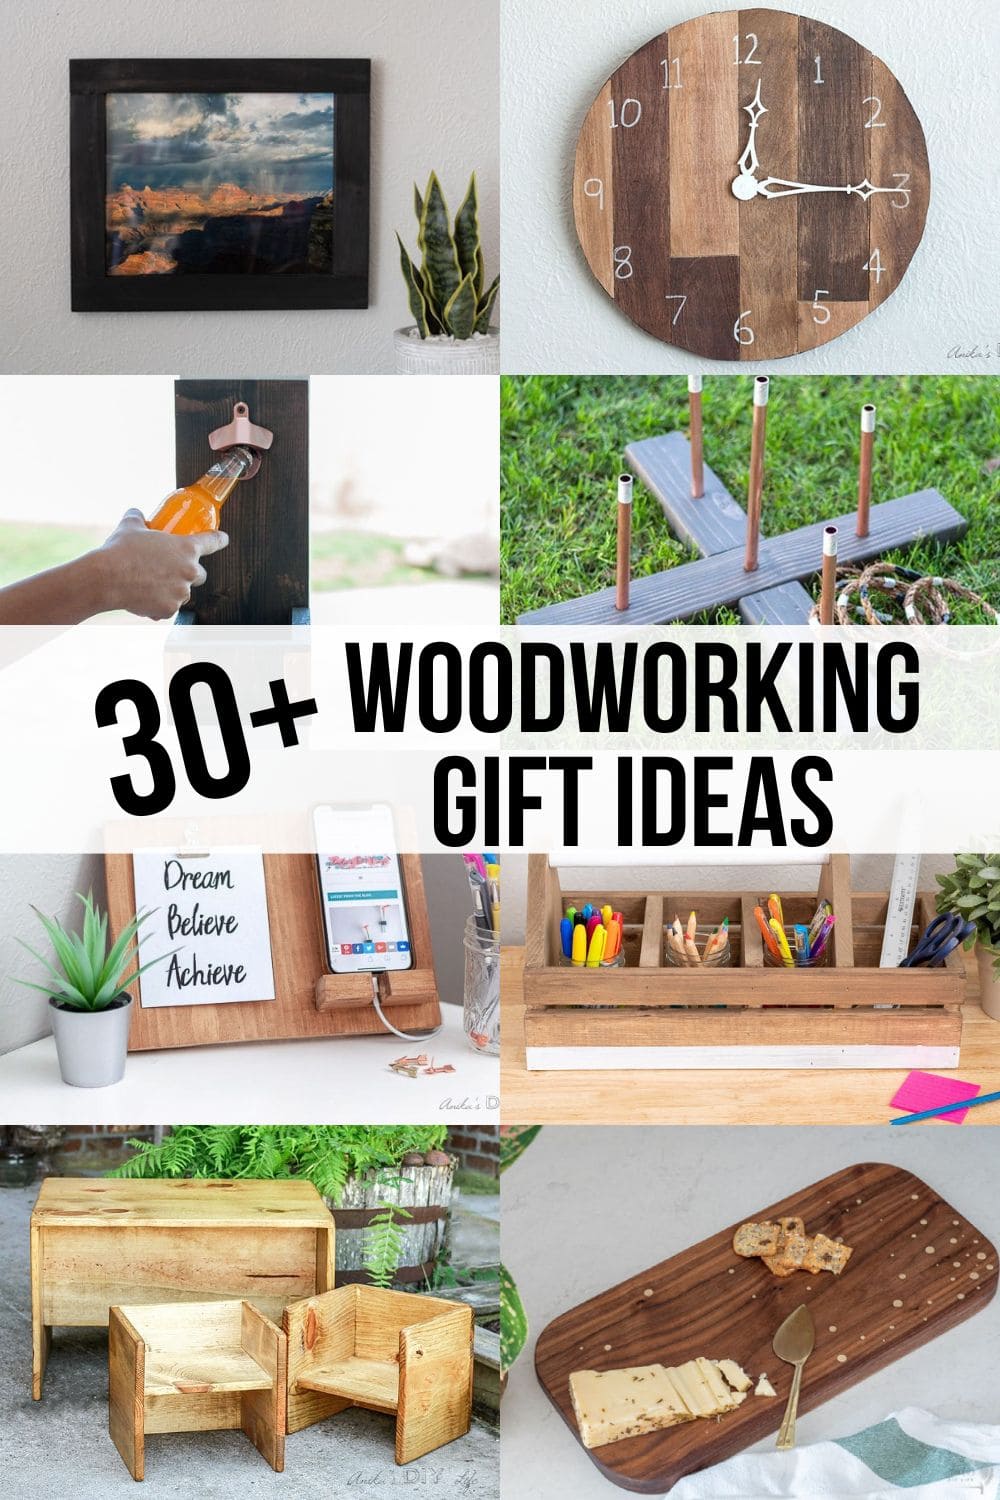 Image collage of eight woodworking gift ideas with text overlay